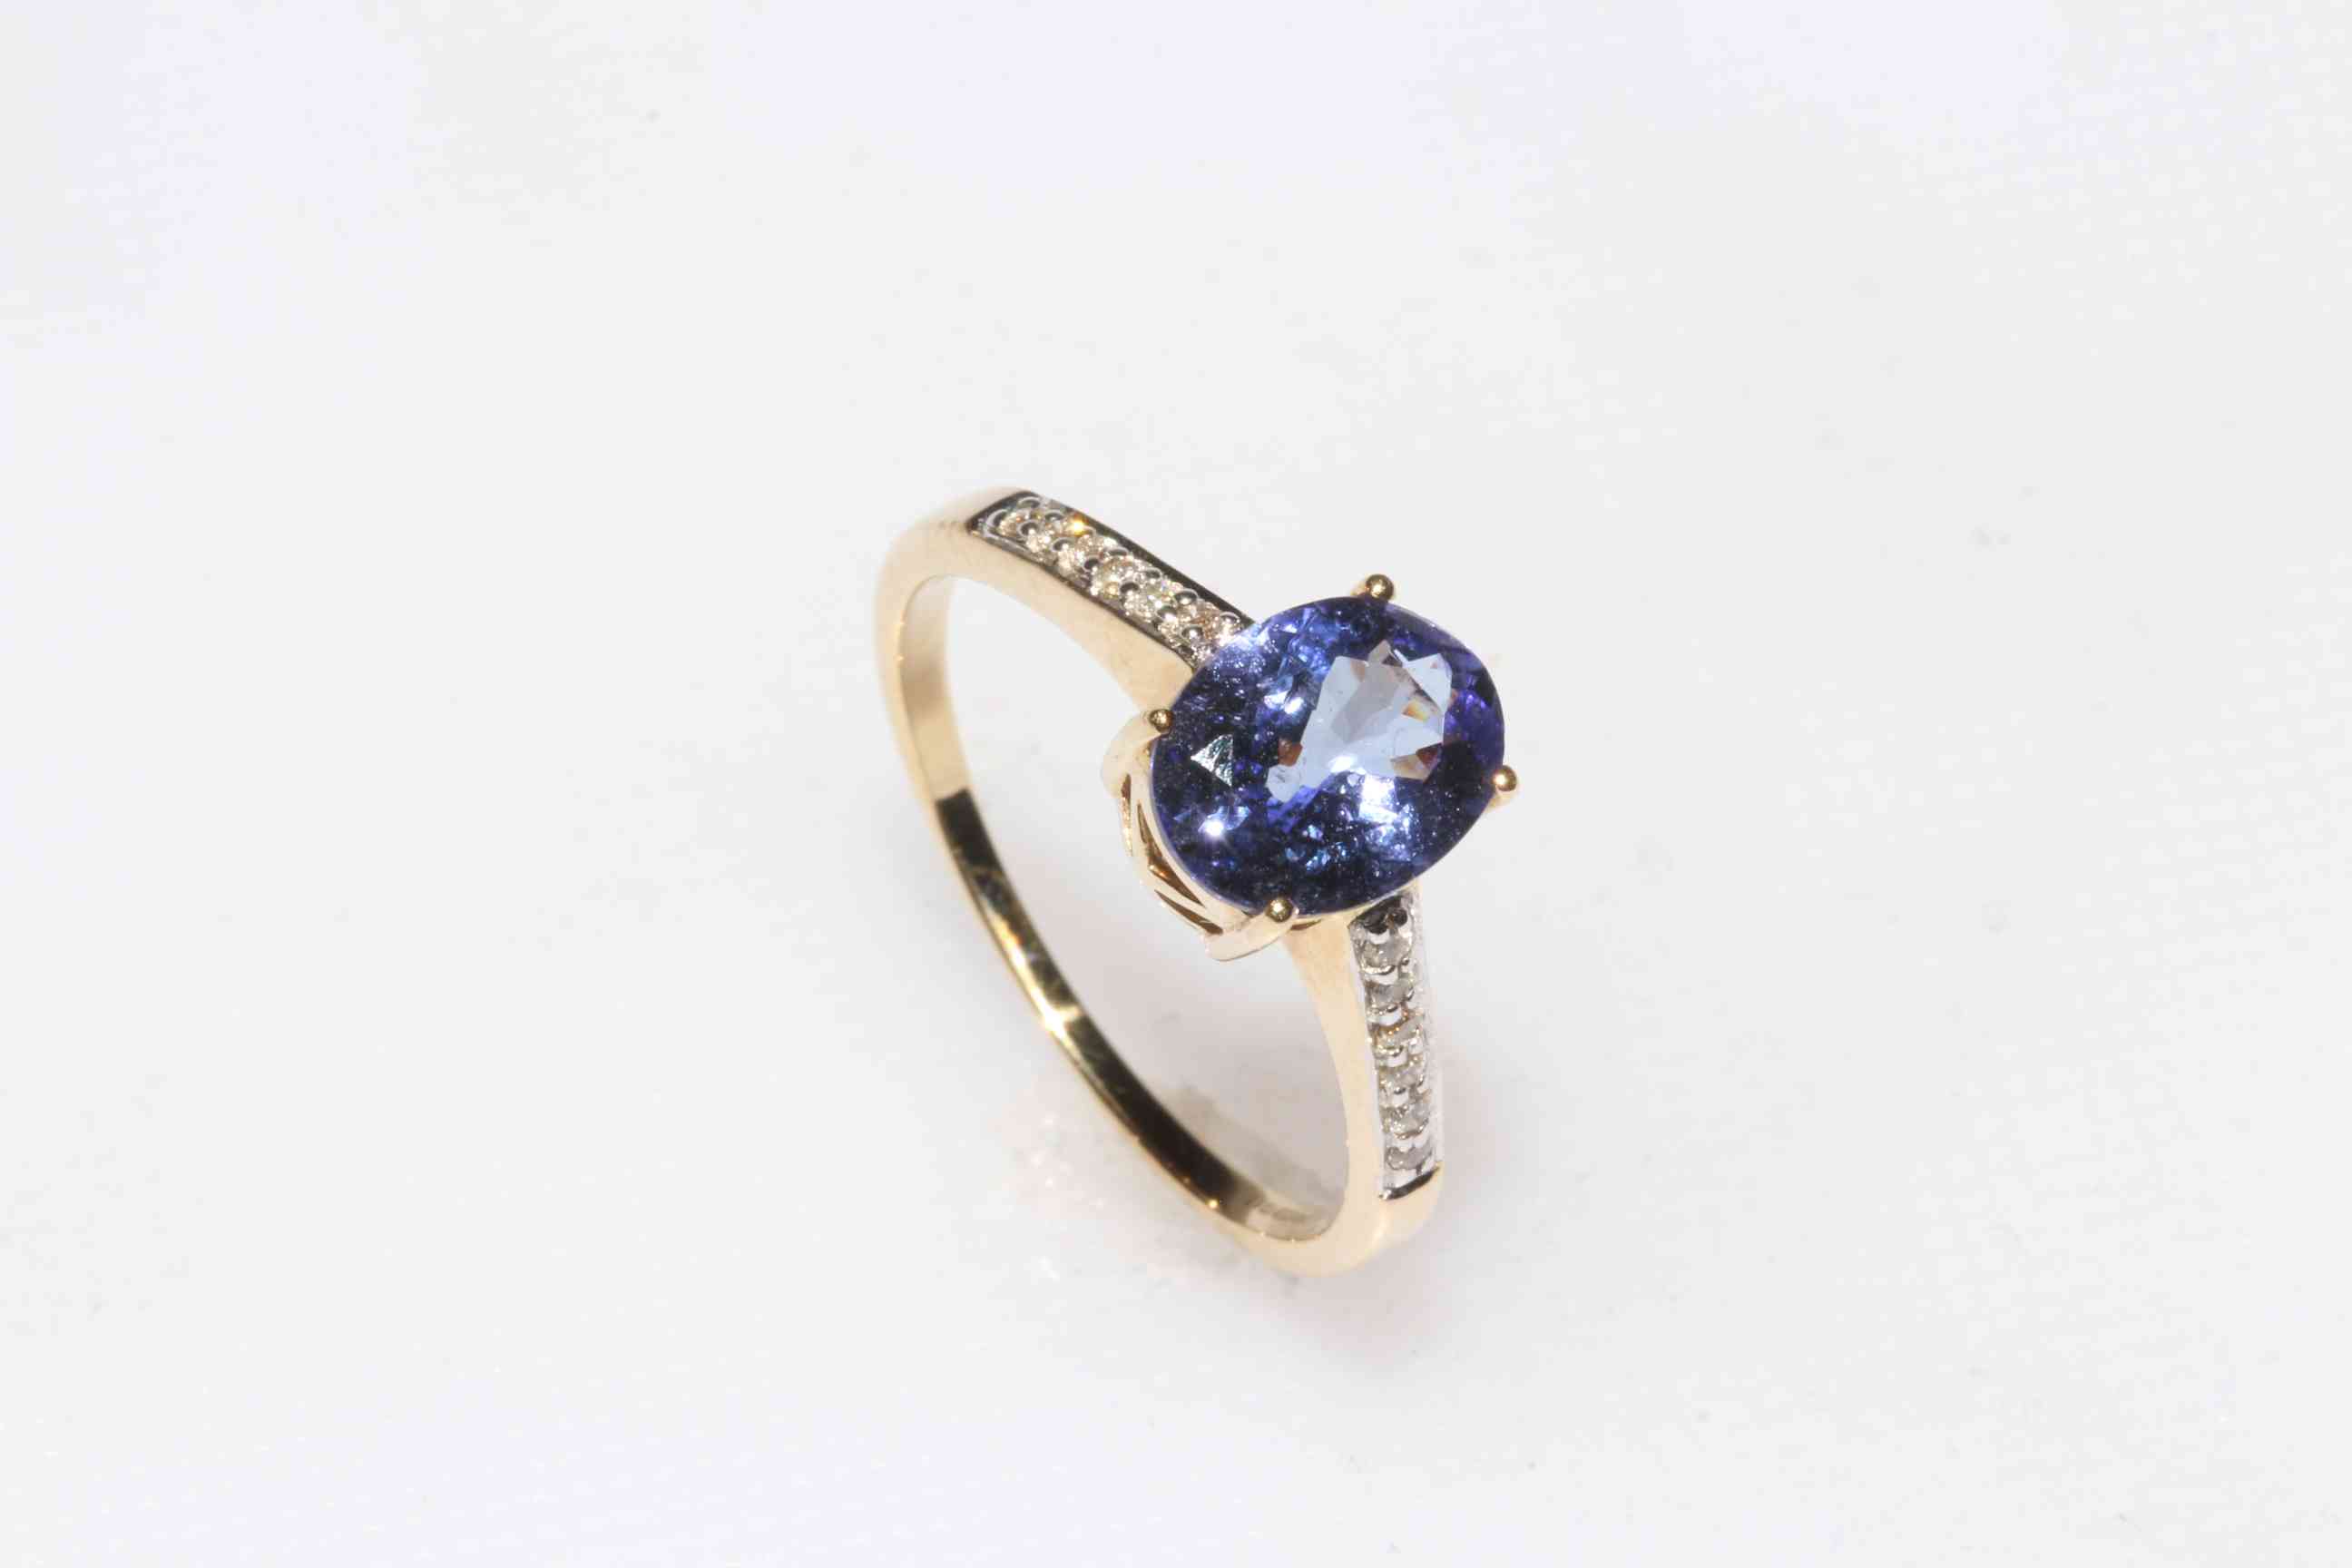 Tanzanite and diamond 14k yellow gold ring, the approximate 1.